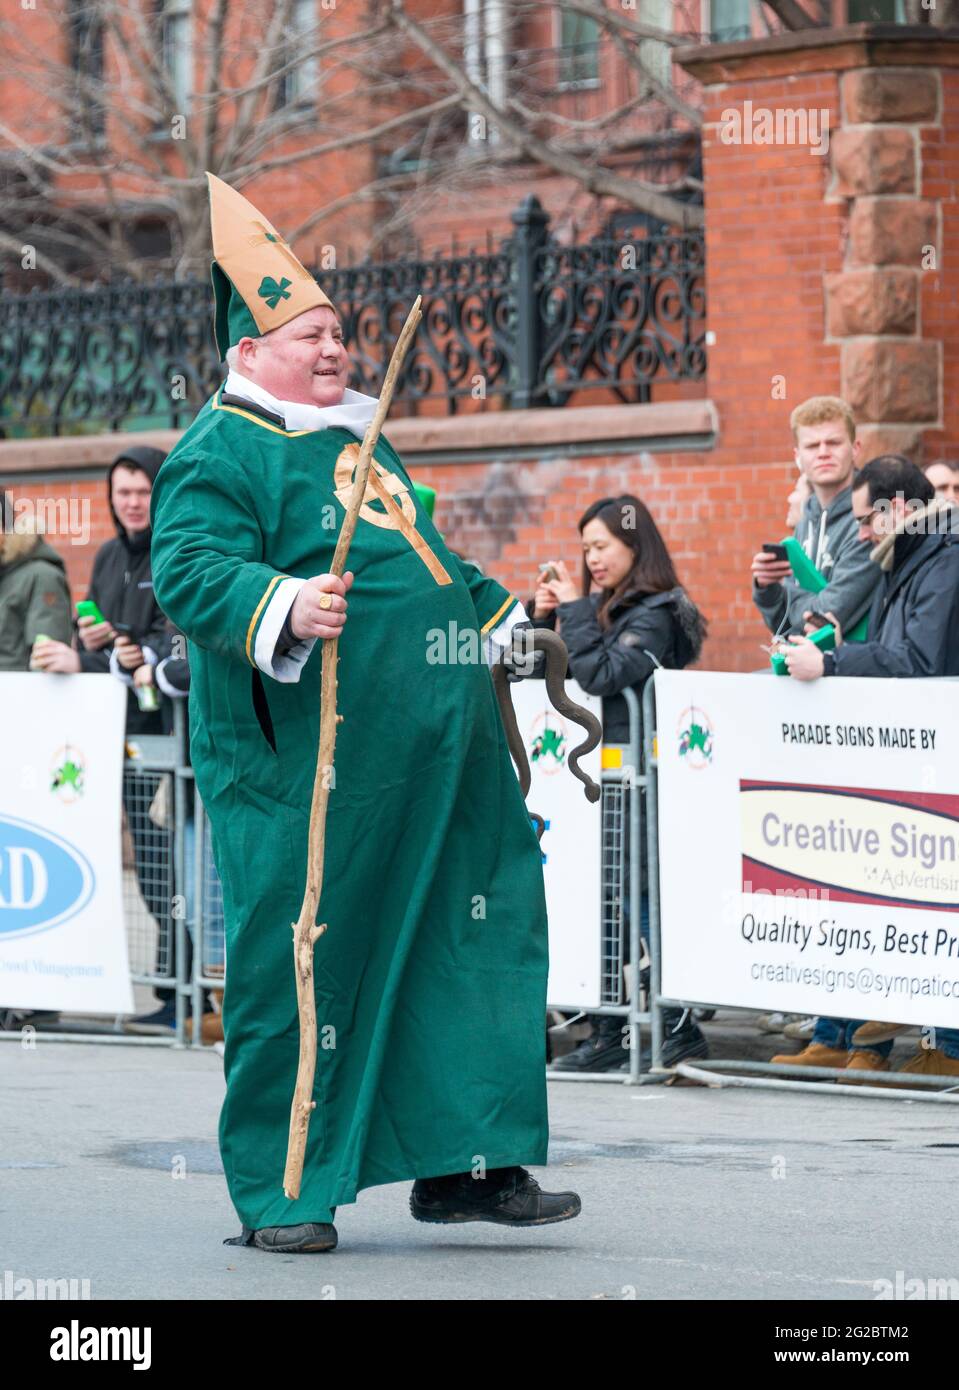 St. Patrick's Day Parade joyful participant dressed up like St. Patrick himself, multicultural Toronto enjoys the Irish culture as its own Stock Photo